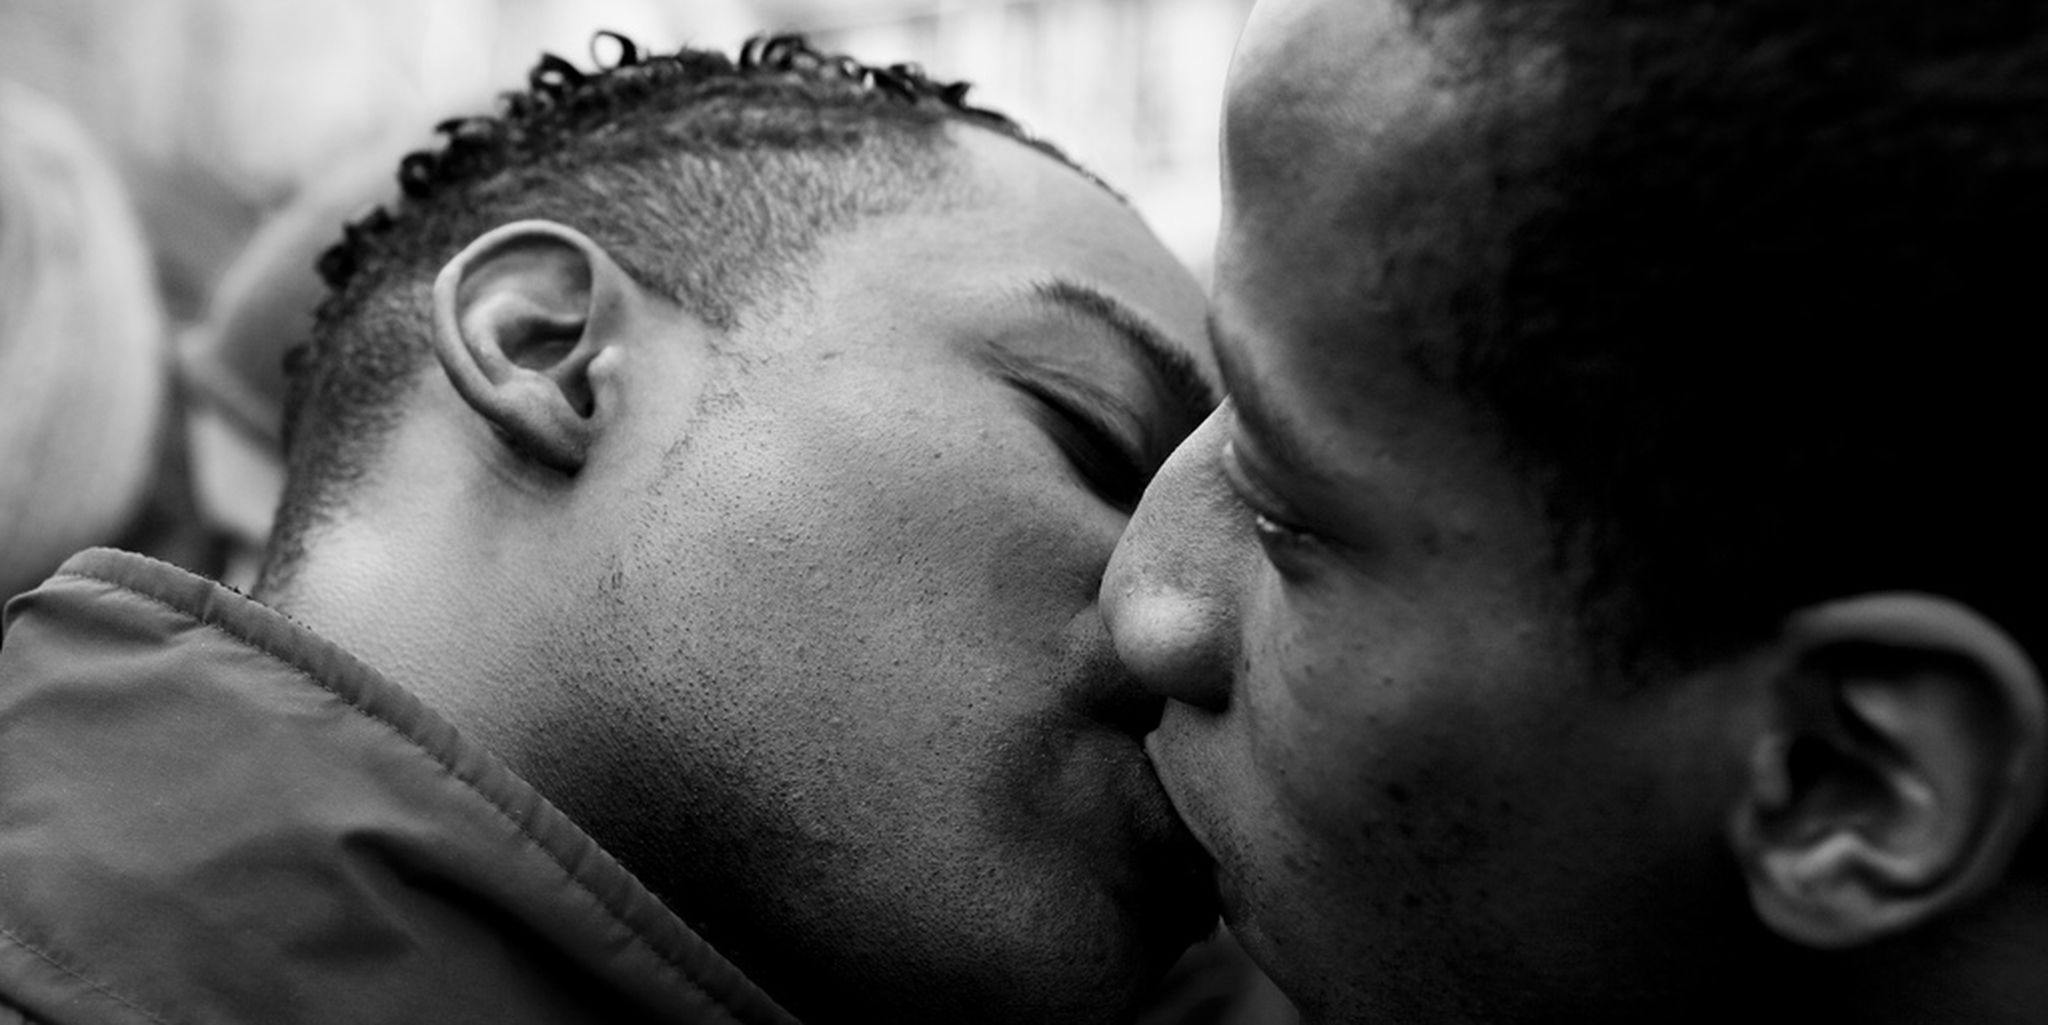 Exclusive Black Porn - Exclusive: North Carolina and Mississippi are watching tons of black gay  porn on Pornhub - The Daily Dot